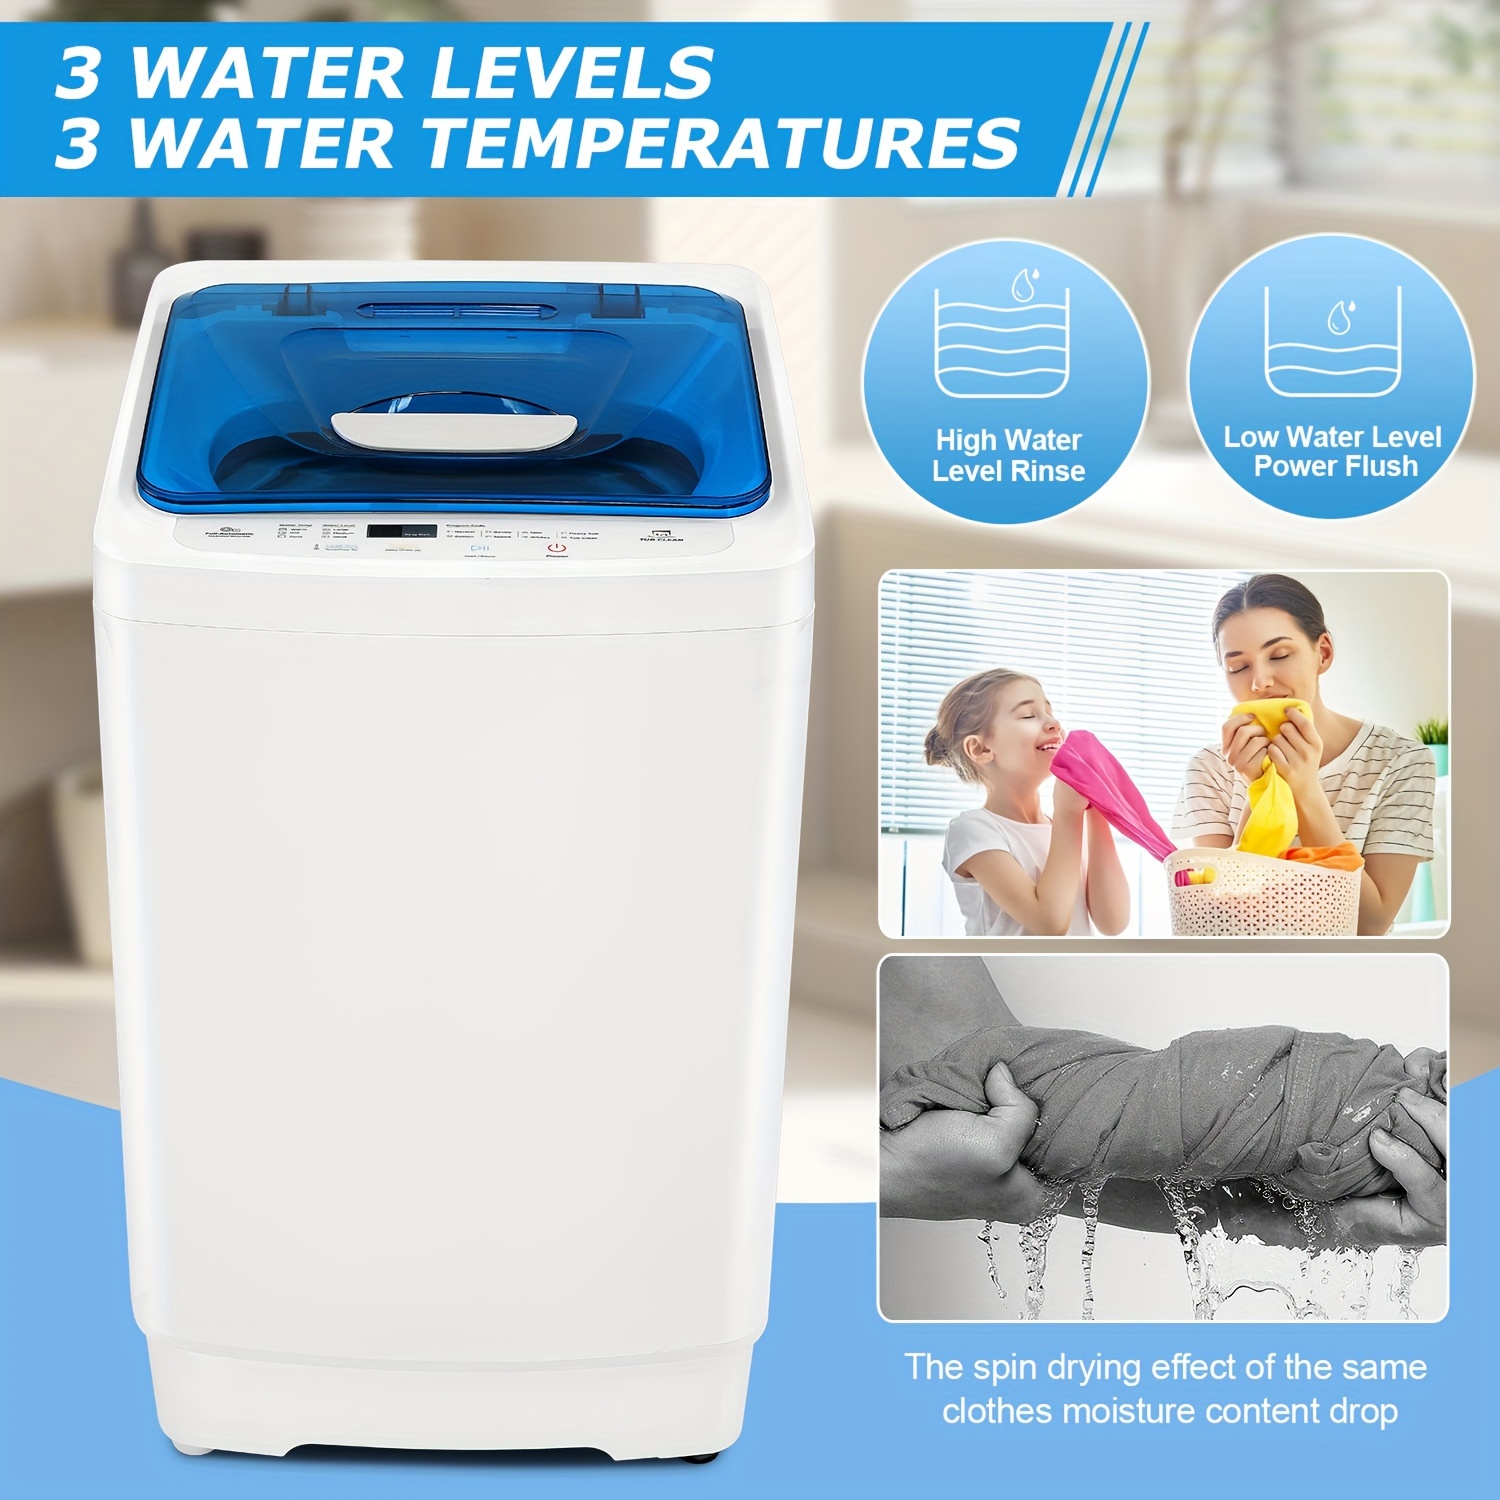 

Fully Automatic , 17.8 Lbs Capacity Portable Washer With Timer Control And Soak Function, Suitable For Apartments, Dormitories, Bathrooms, Rvs, Etc., With Washing Tub And Spin Dryer